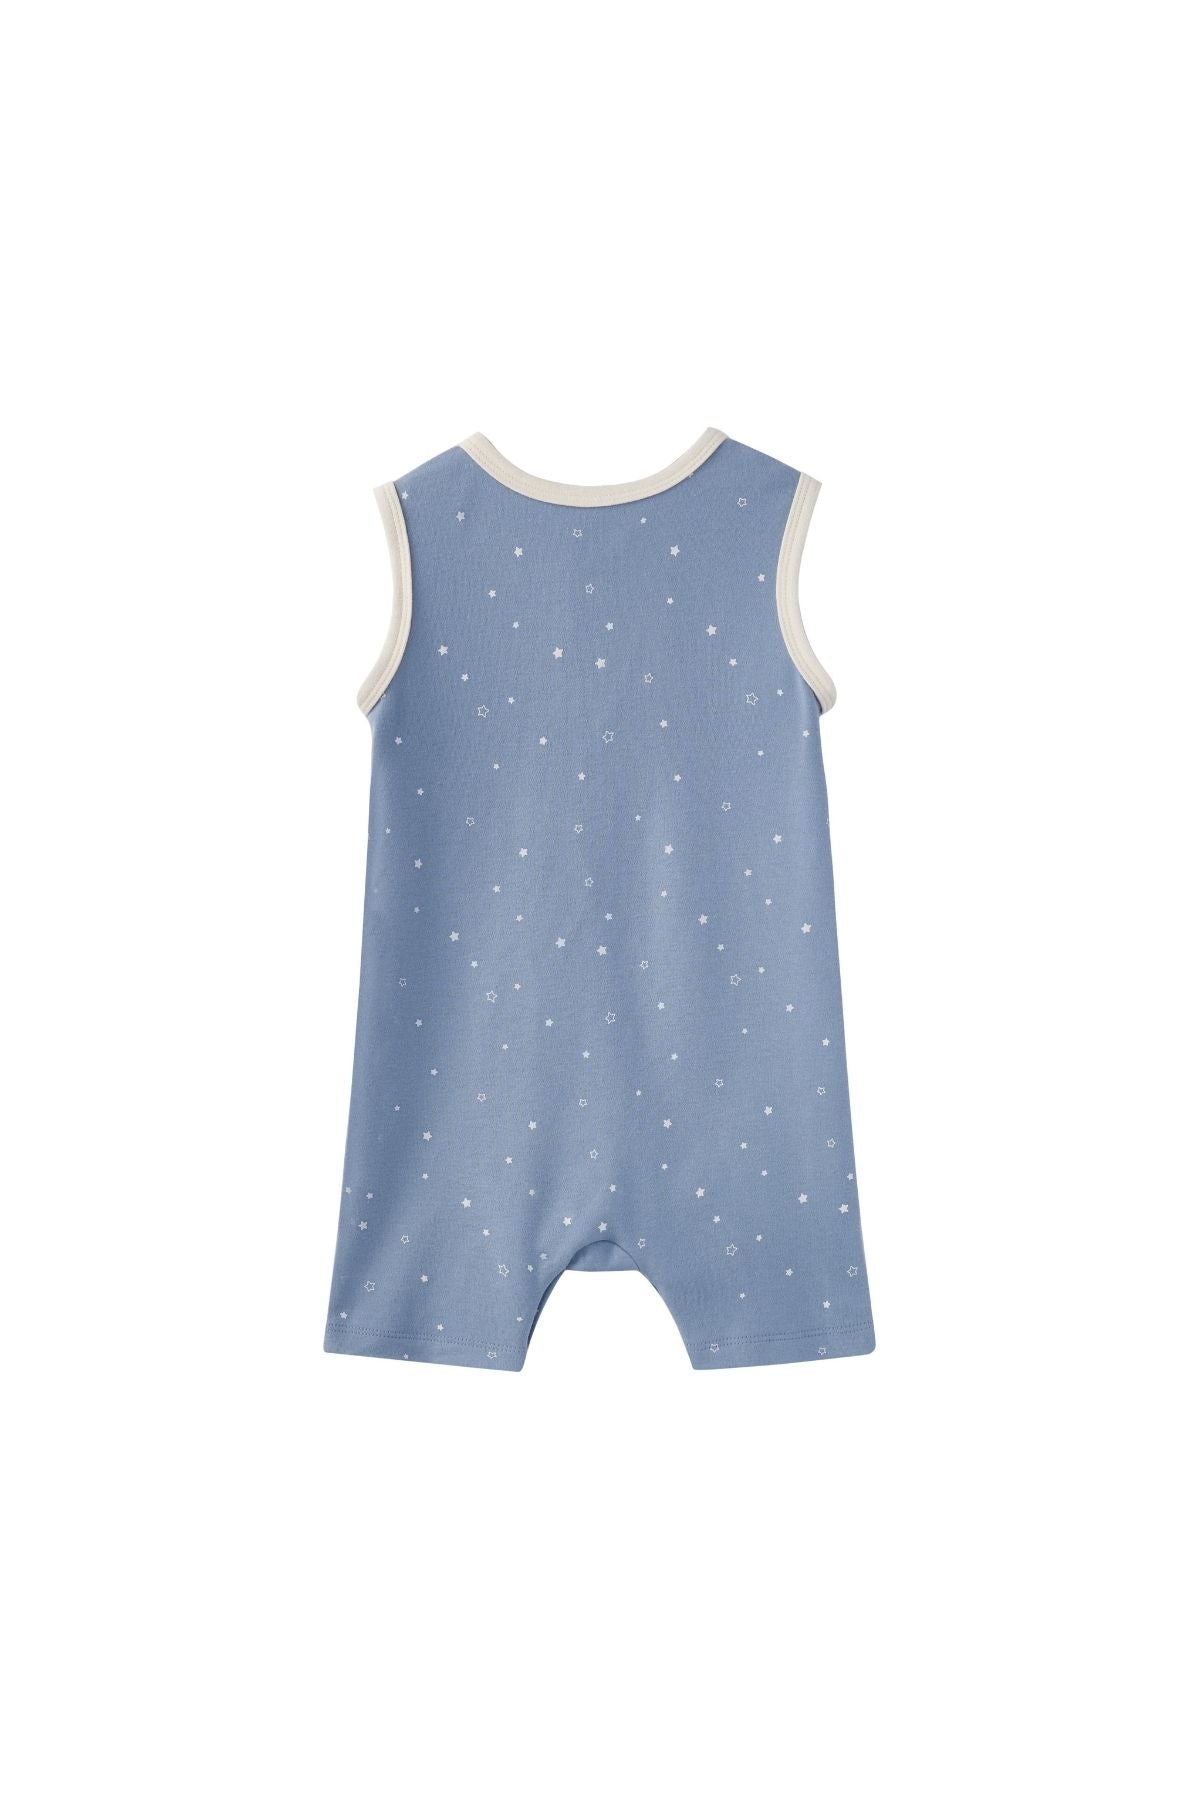 back of Baby Organic Cotton Tank Romper-Blue Starry